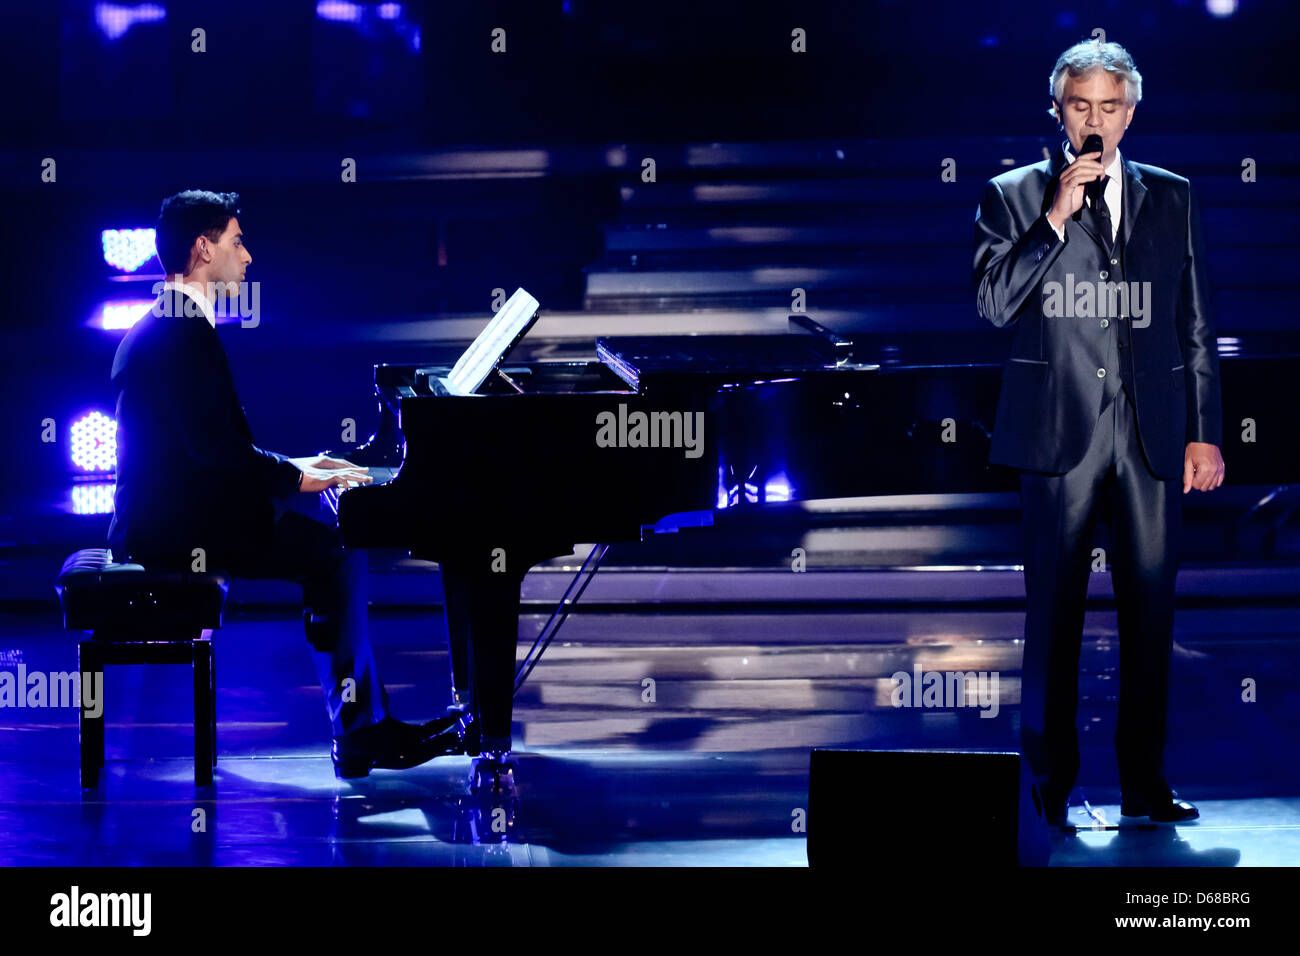 Amos bocelli and andrea bocelli hi-res stock photography and